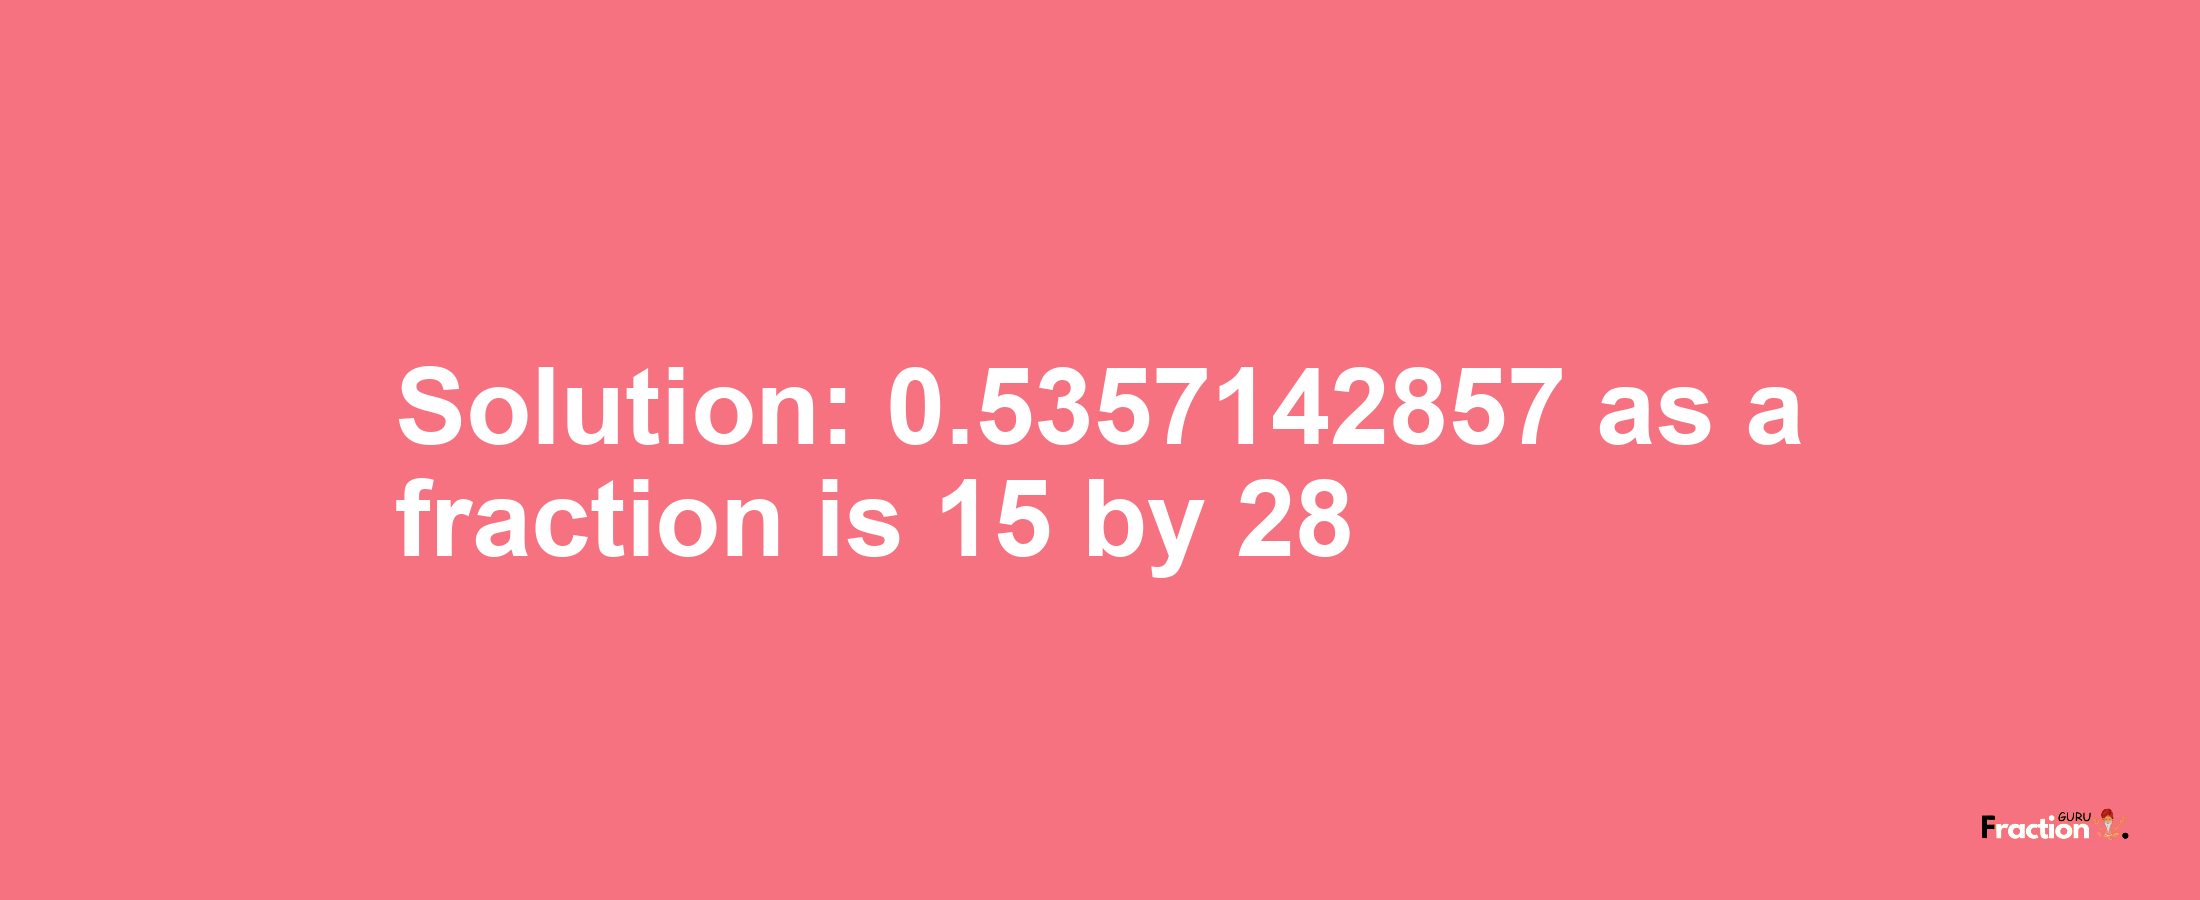 Solution:0.5357142857 as a fraction is 15/28